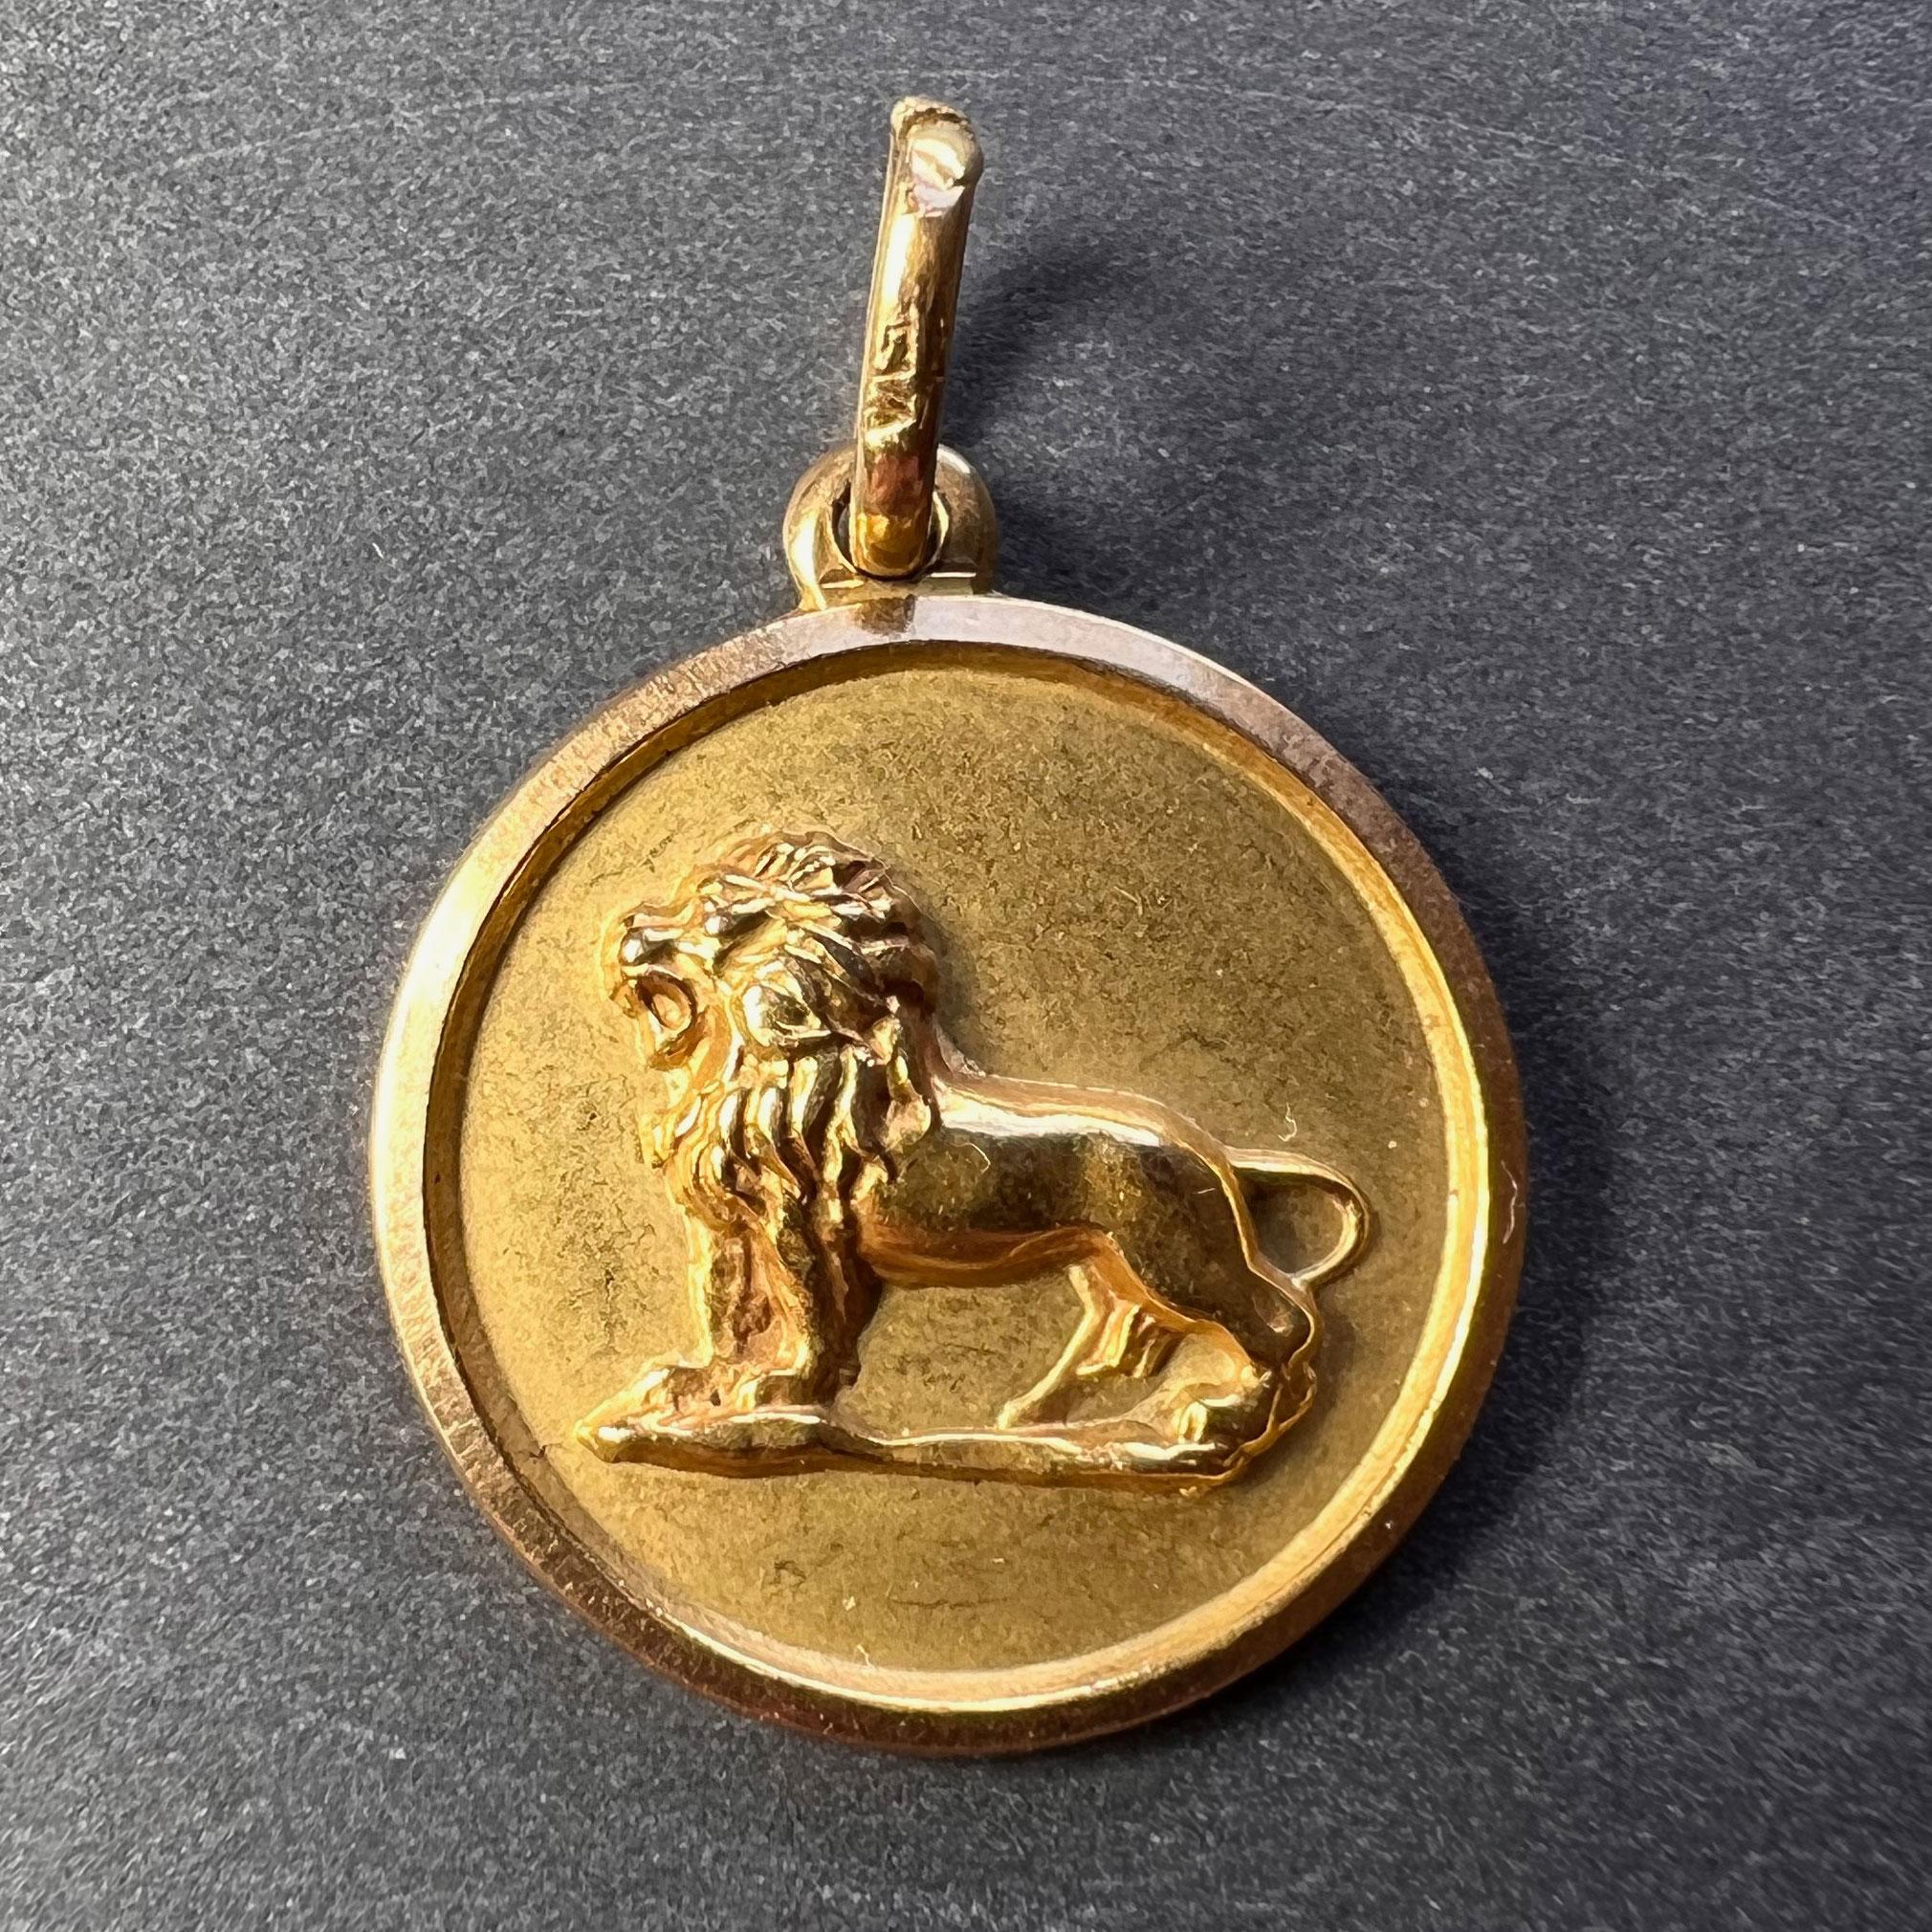 An 18 karat (18K) yellow gold charm pendant designed as the zodiac star sign of Leo depicting a lion. Stamped 750 for 18 karat gold to the bail.
 
Dimensions: 2 x 1.7 x 0.25 cm (not including jump ring)
Weight: 3.80 grams 